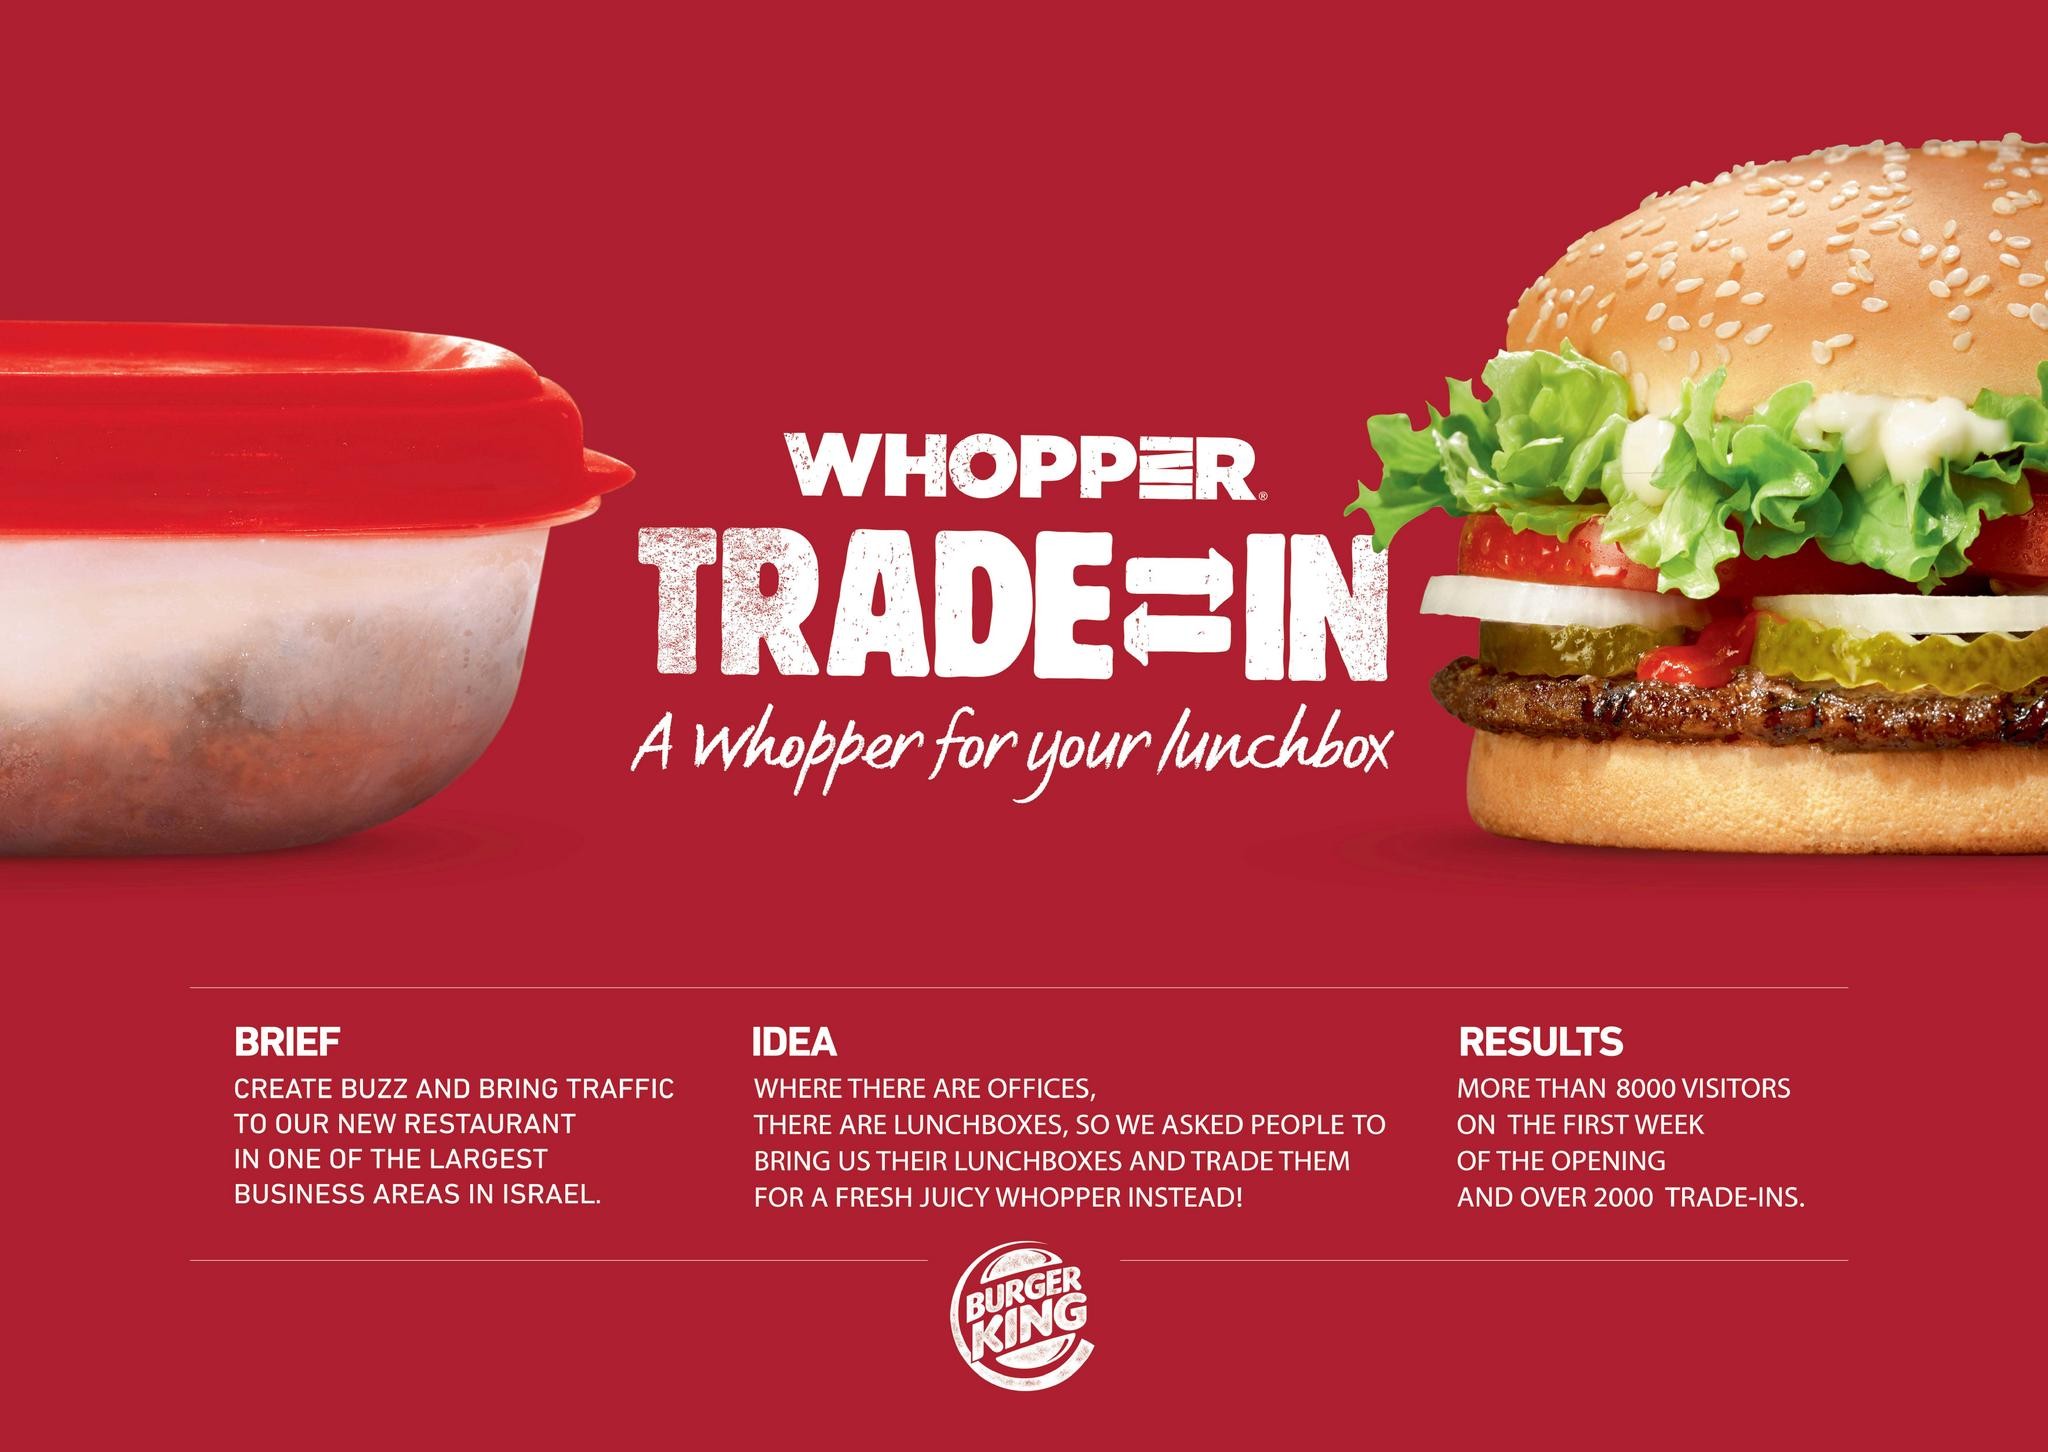 Whopper Trade in - A Whopper for your lunchbox